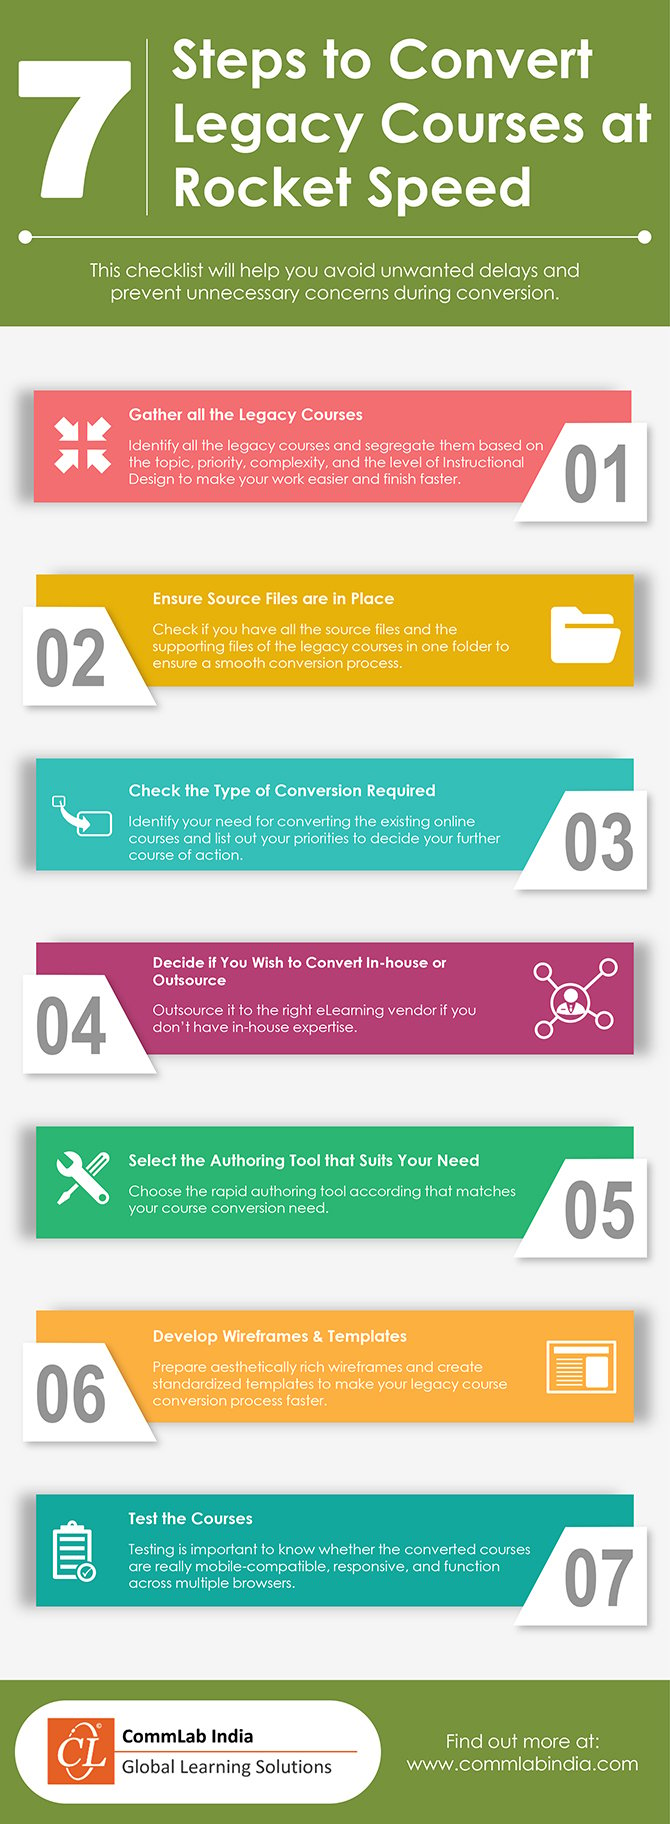 7 Steps to Convert Legacy Courses at Rocket Speed [Infographic]